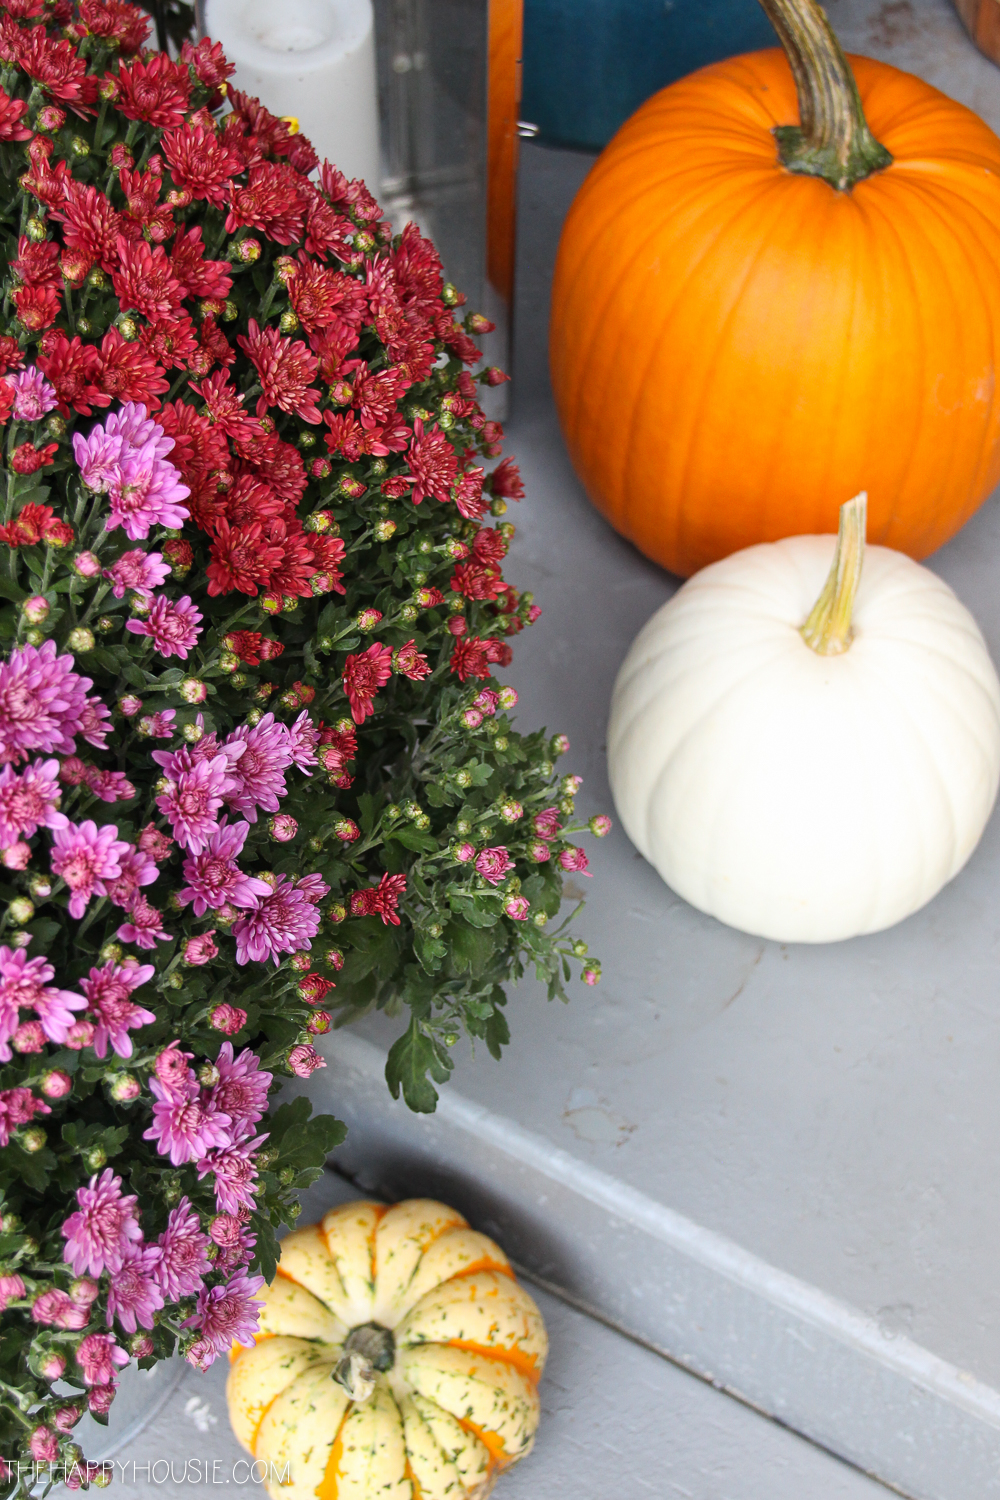 White and orange pumpkins beside purple and red floral displays.